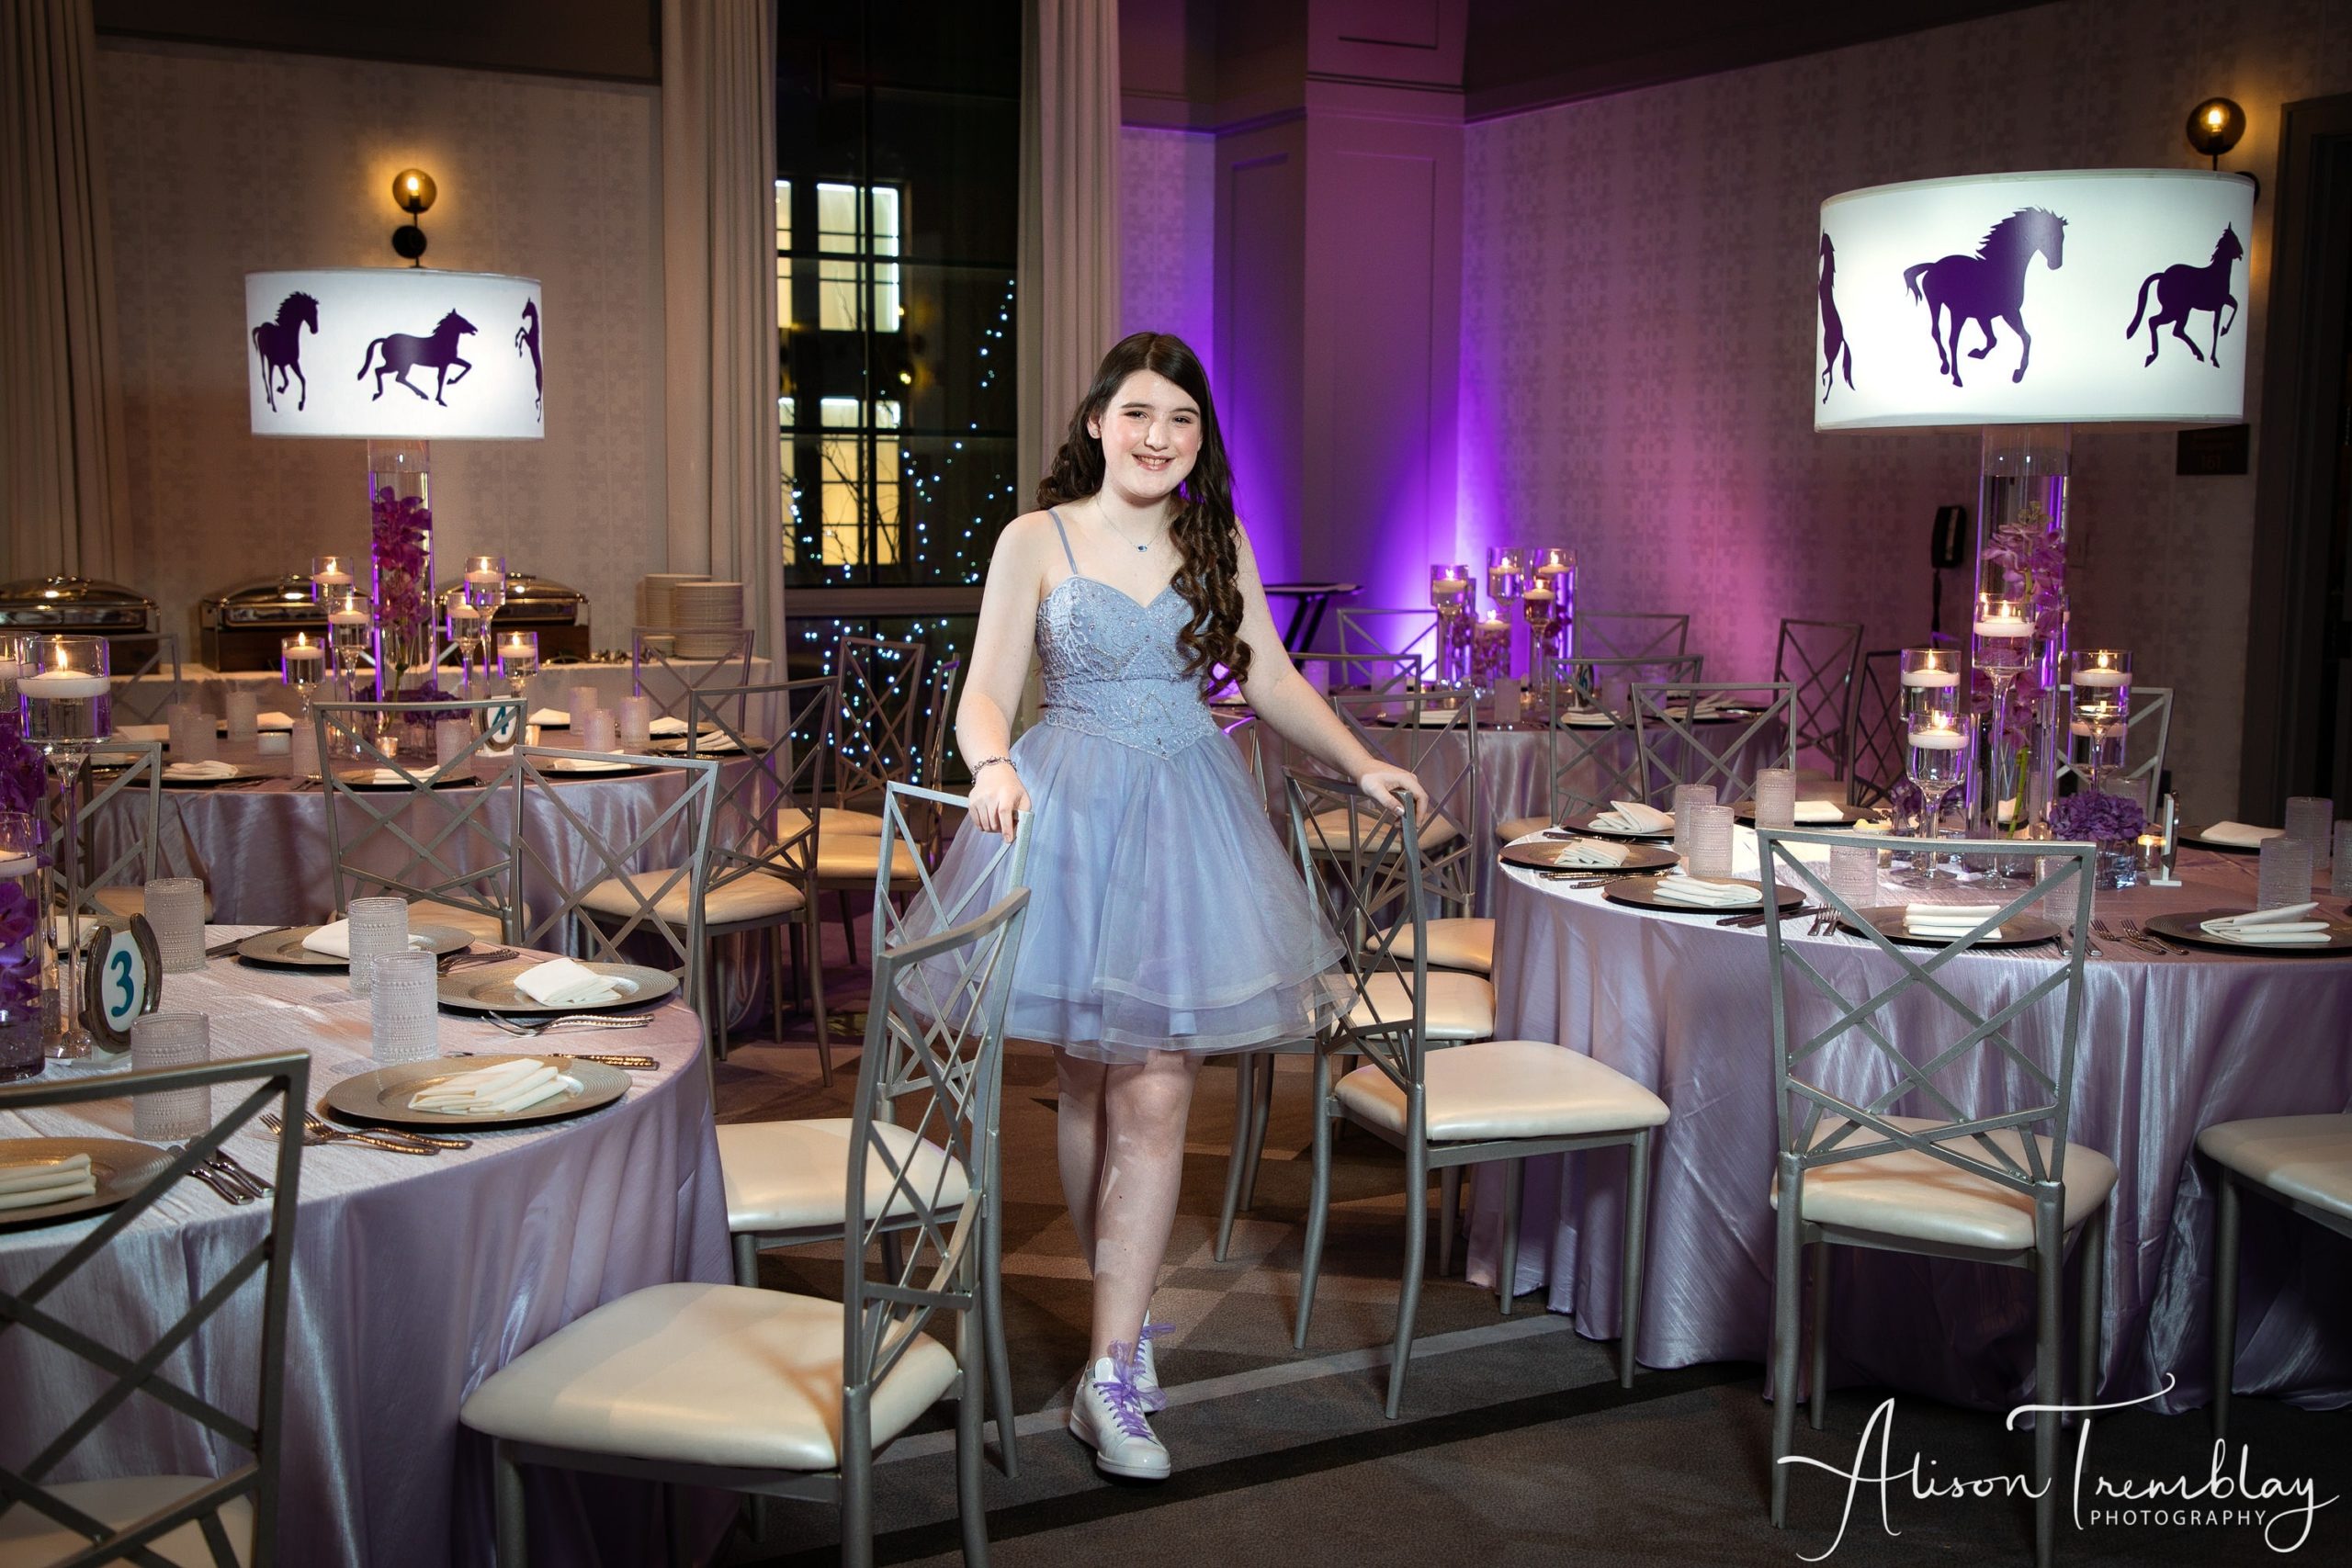 Zoe's Purple and Teal Equestrian Bat Mitzvah at Canopy by Hilton Washington DC Bethesda North | Pop Color Events | Adding a Pop of Color to Bar & Bat Mitzvahs in DC, MD & VA | Photo by: Alison Tremblay Photography